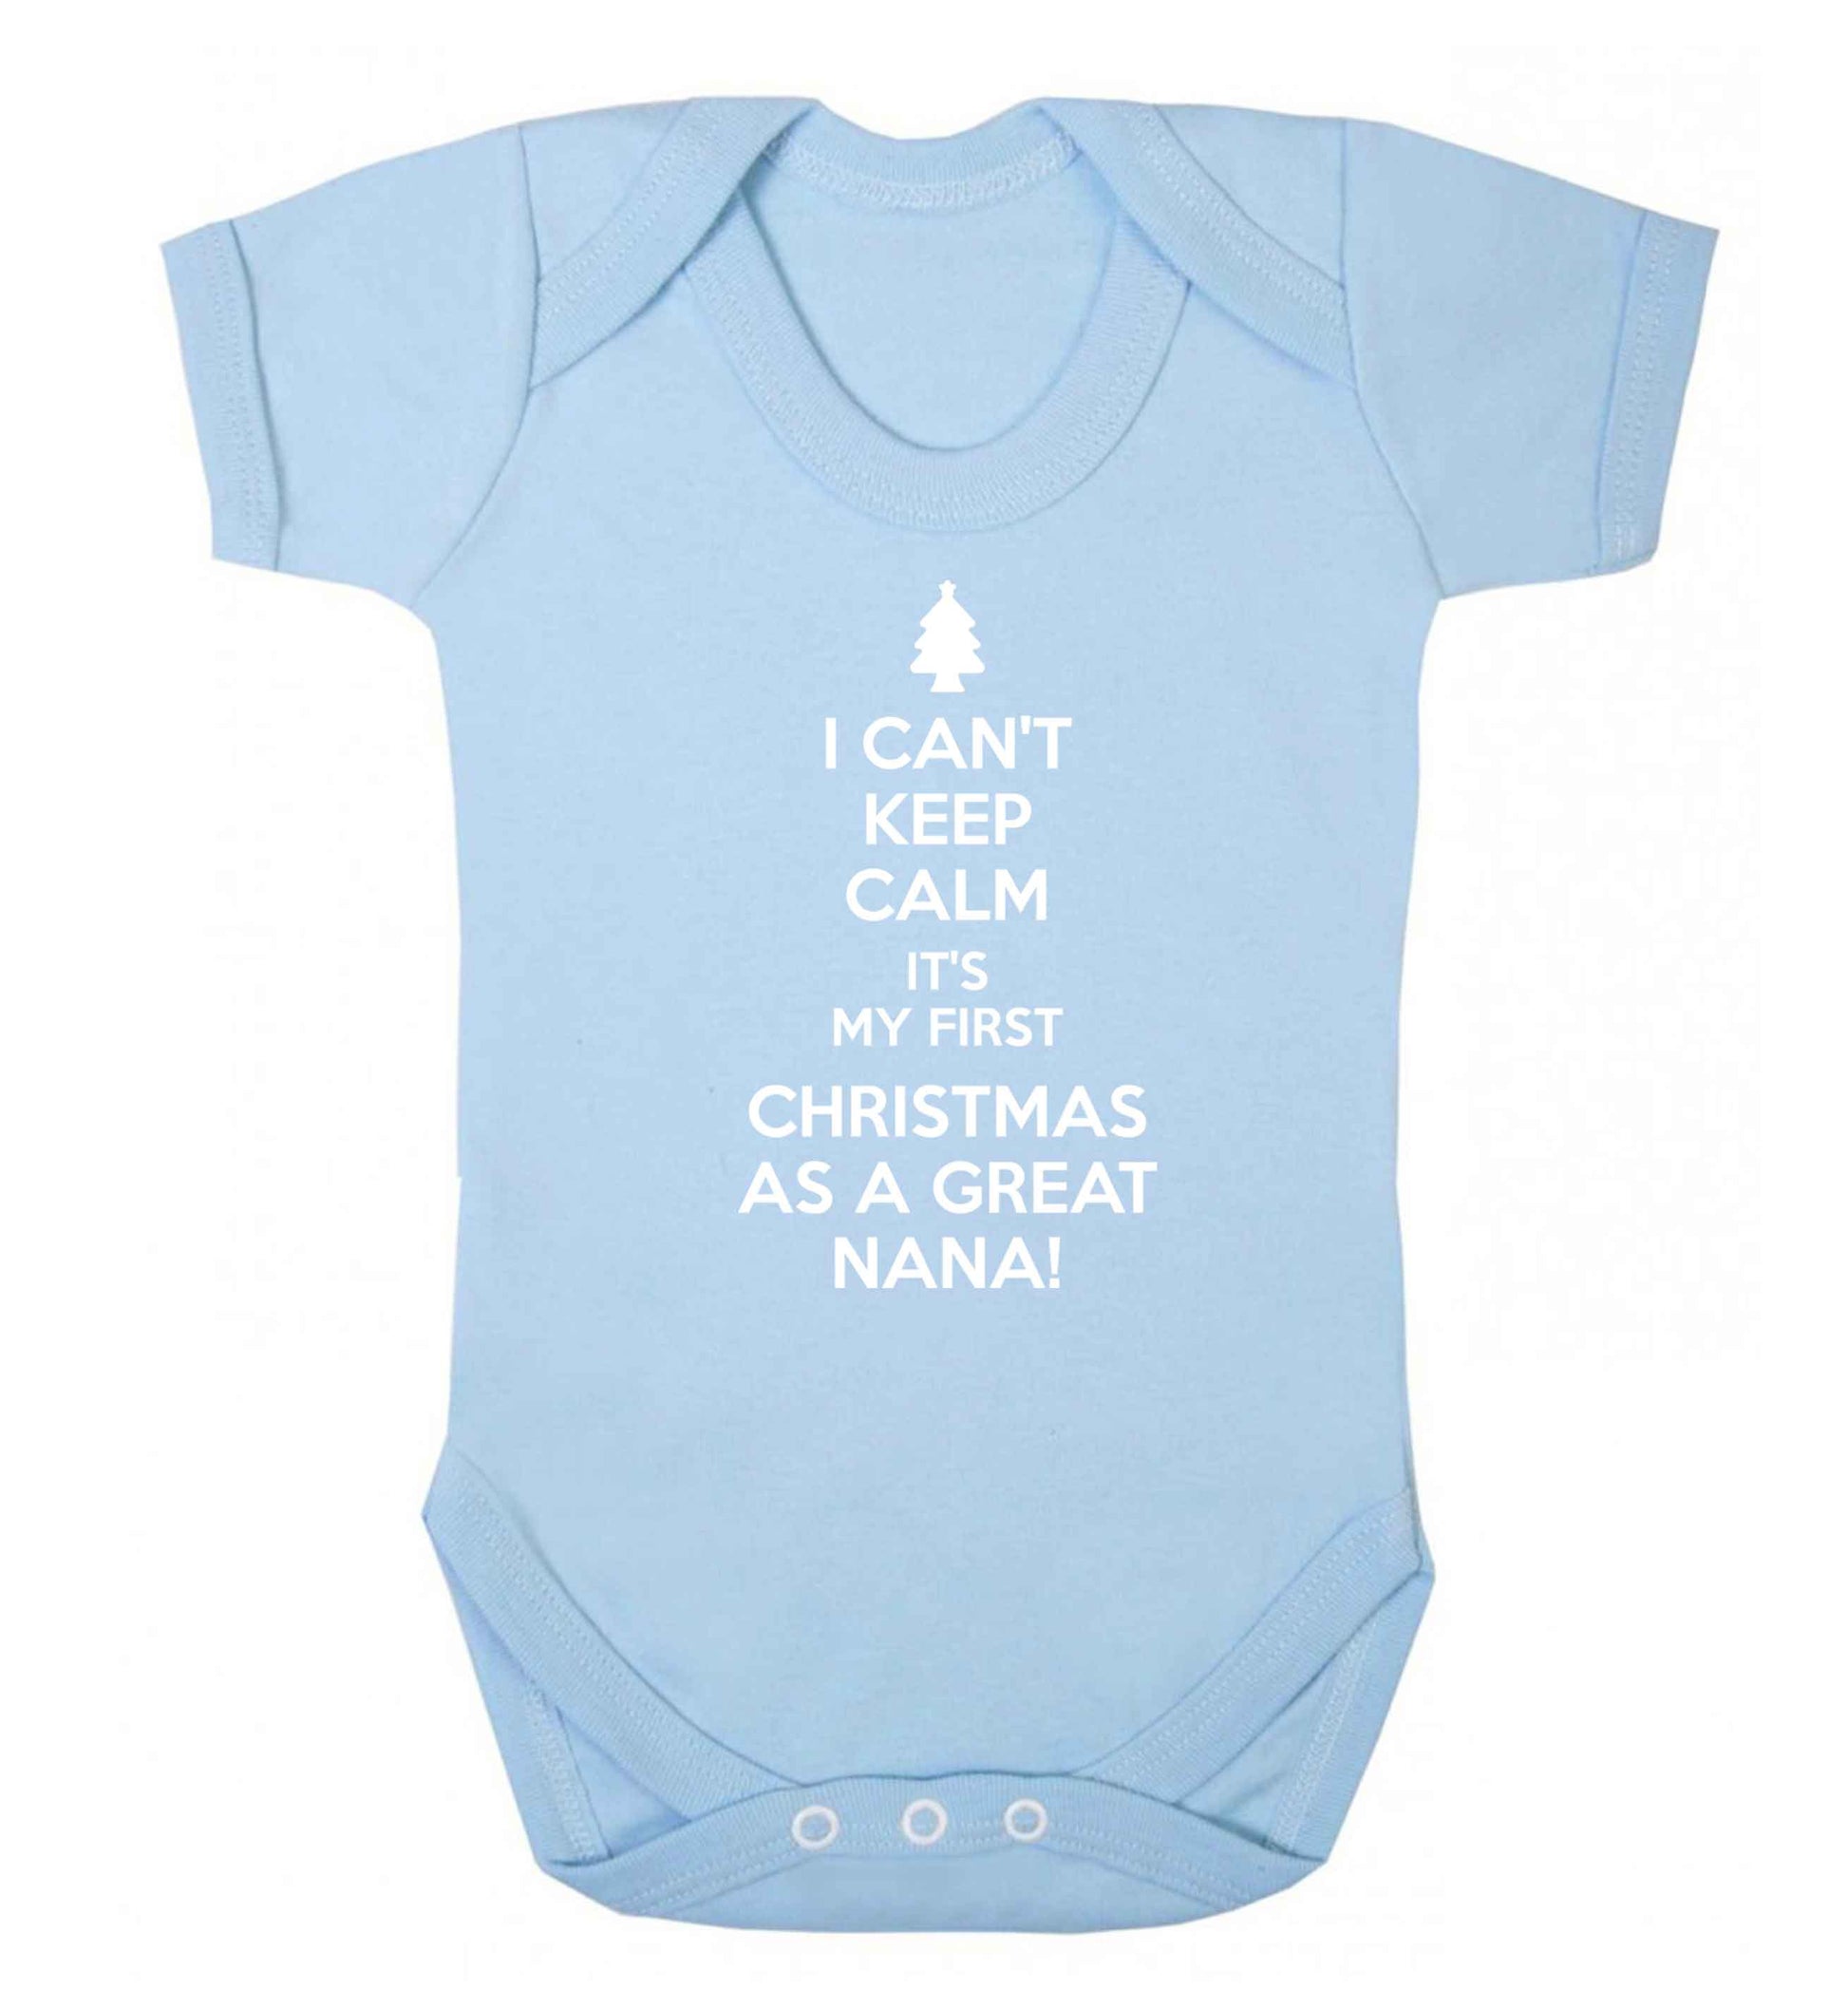 I can't keep calm it's my first Christmas as a great nana! Baby Vest pale blue 18-24 months